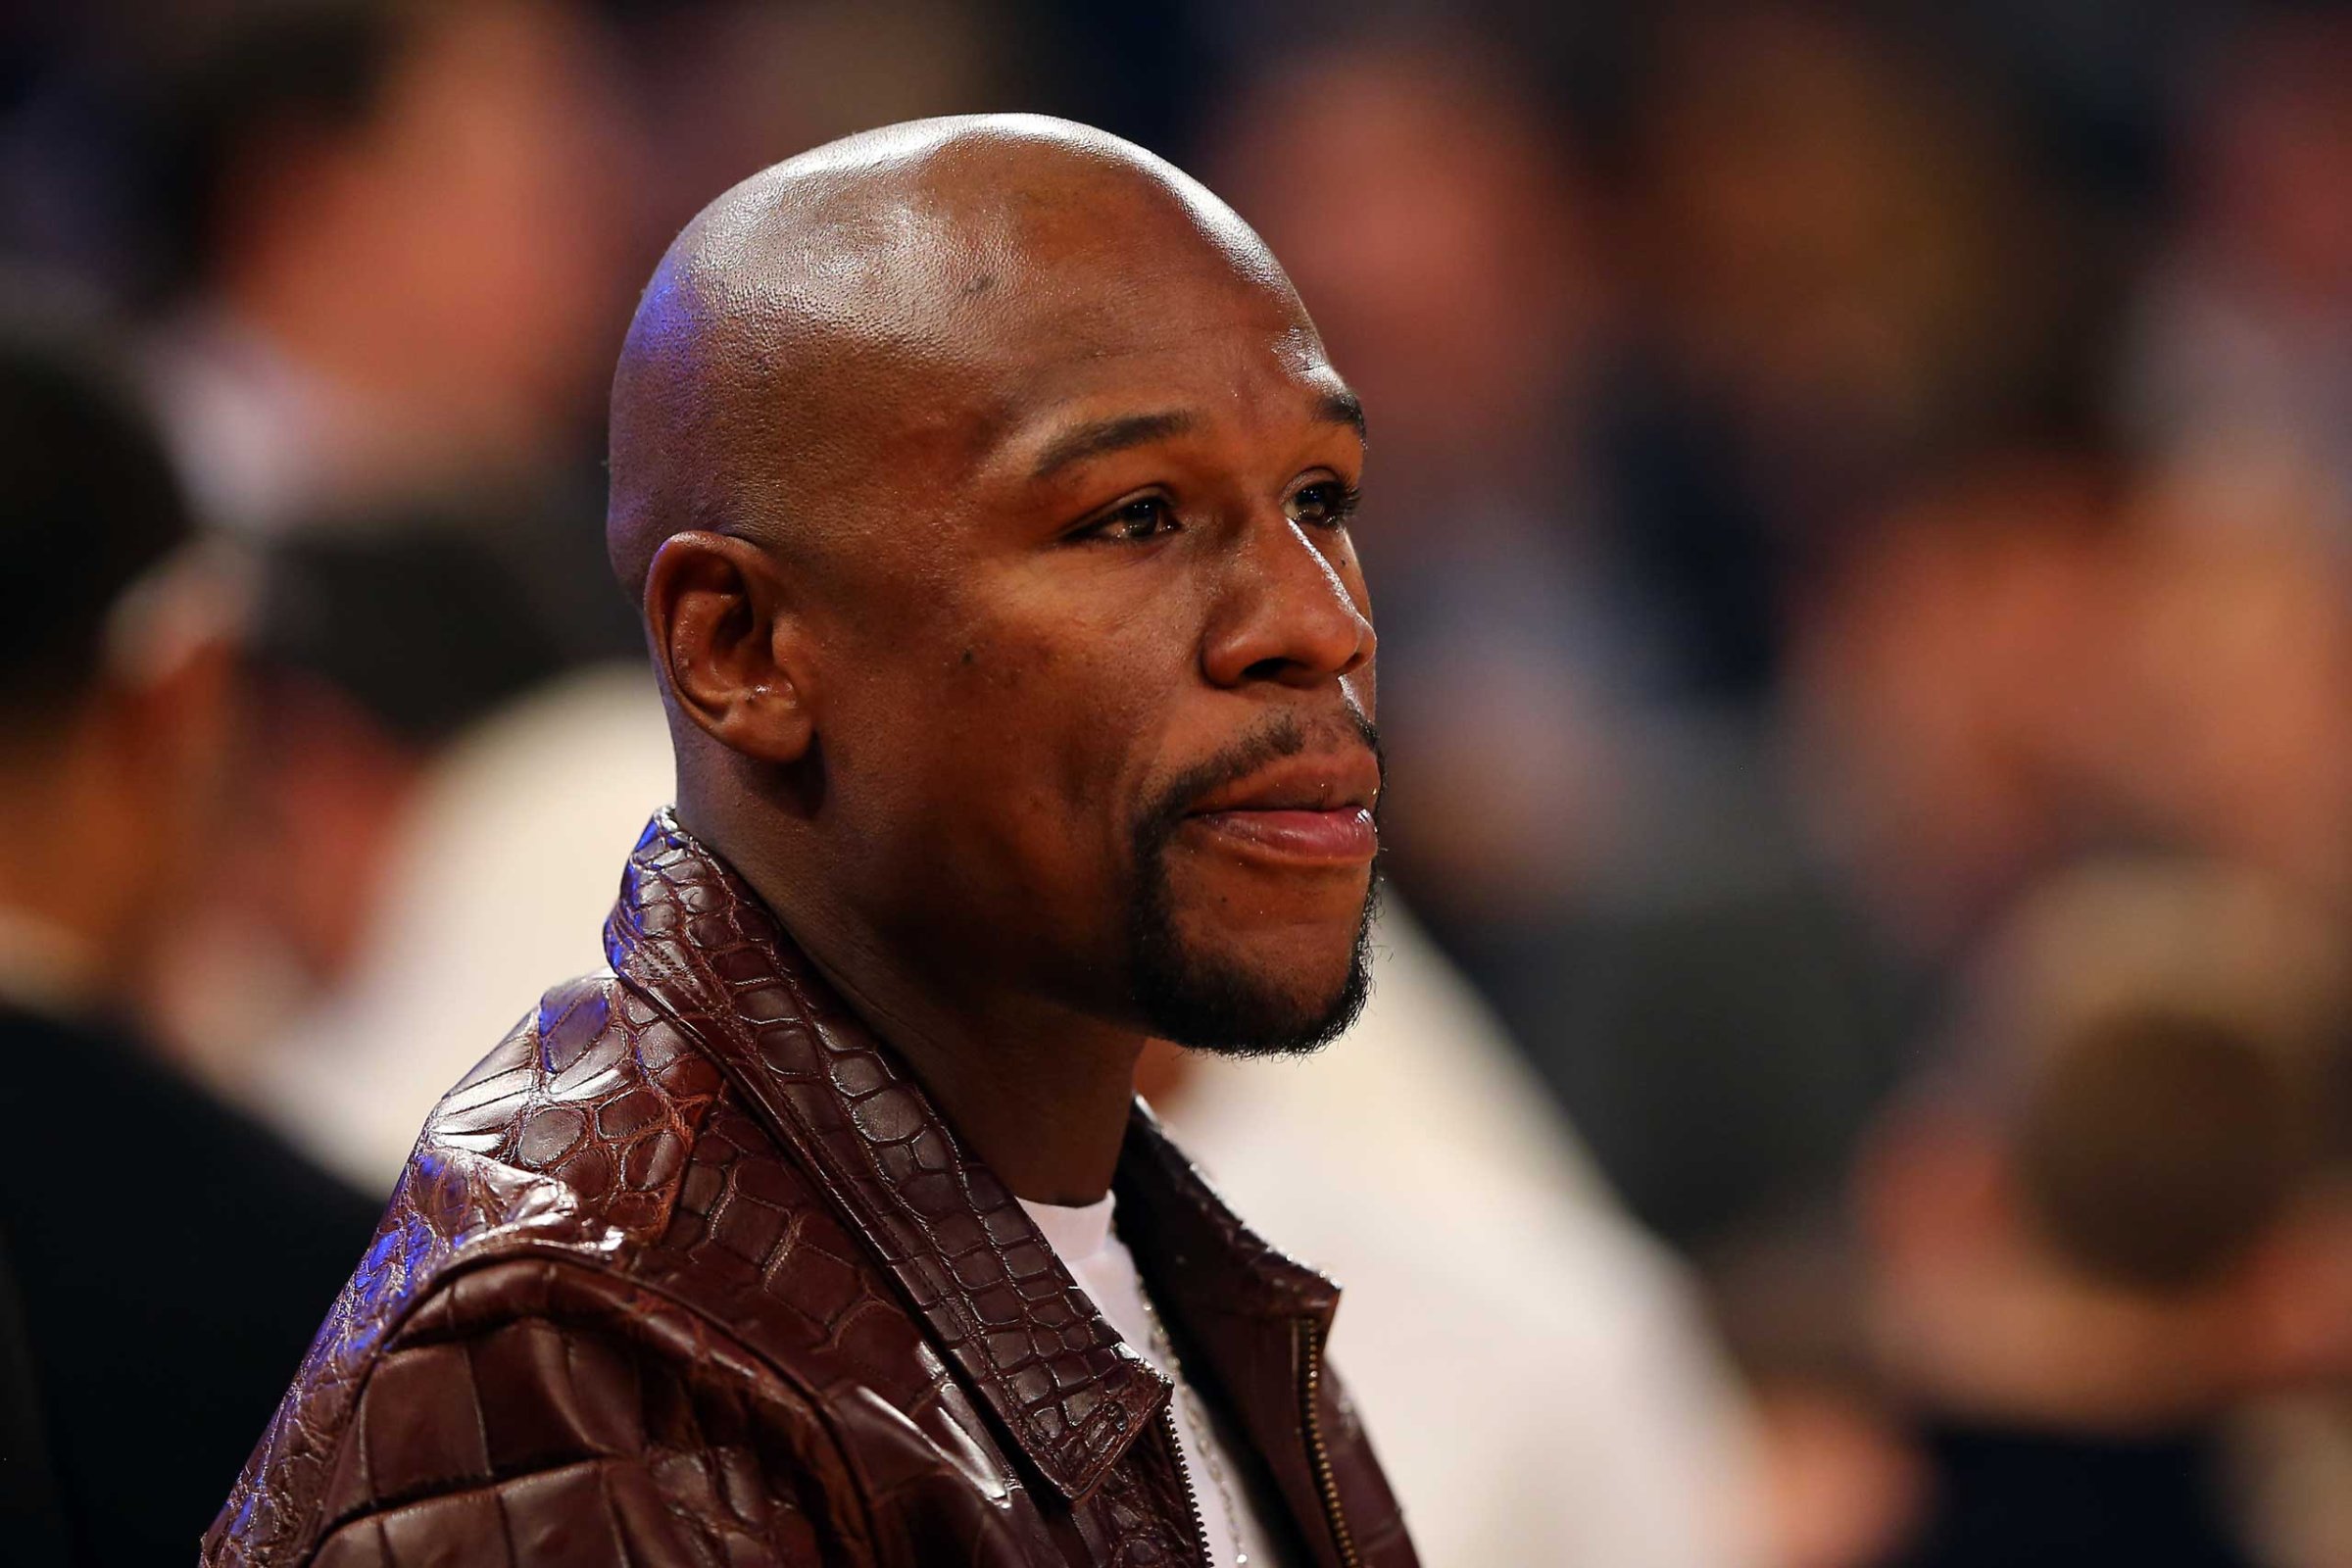 Boxer Floyd Mayweather Jr. attends the 2015 NBA All-Star Game at Madison Square Garden on February 15, 2015 in New York City.